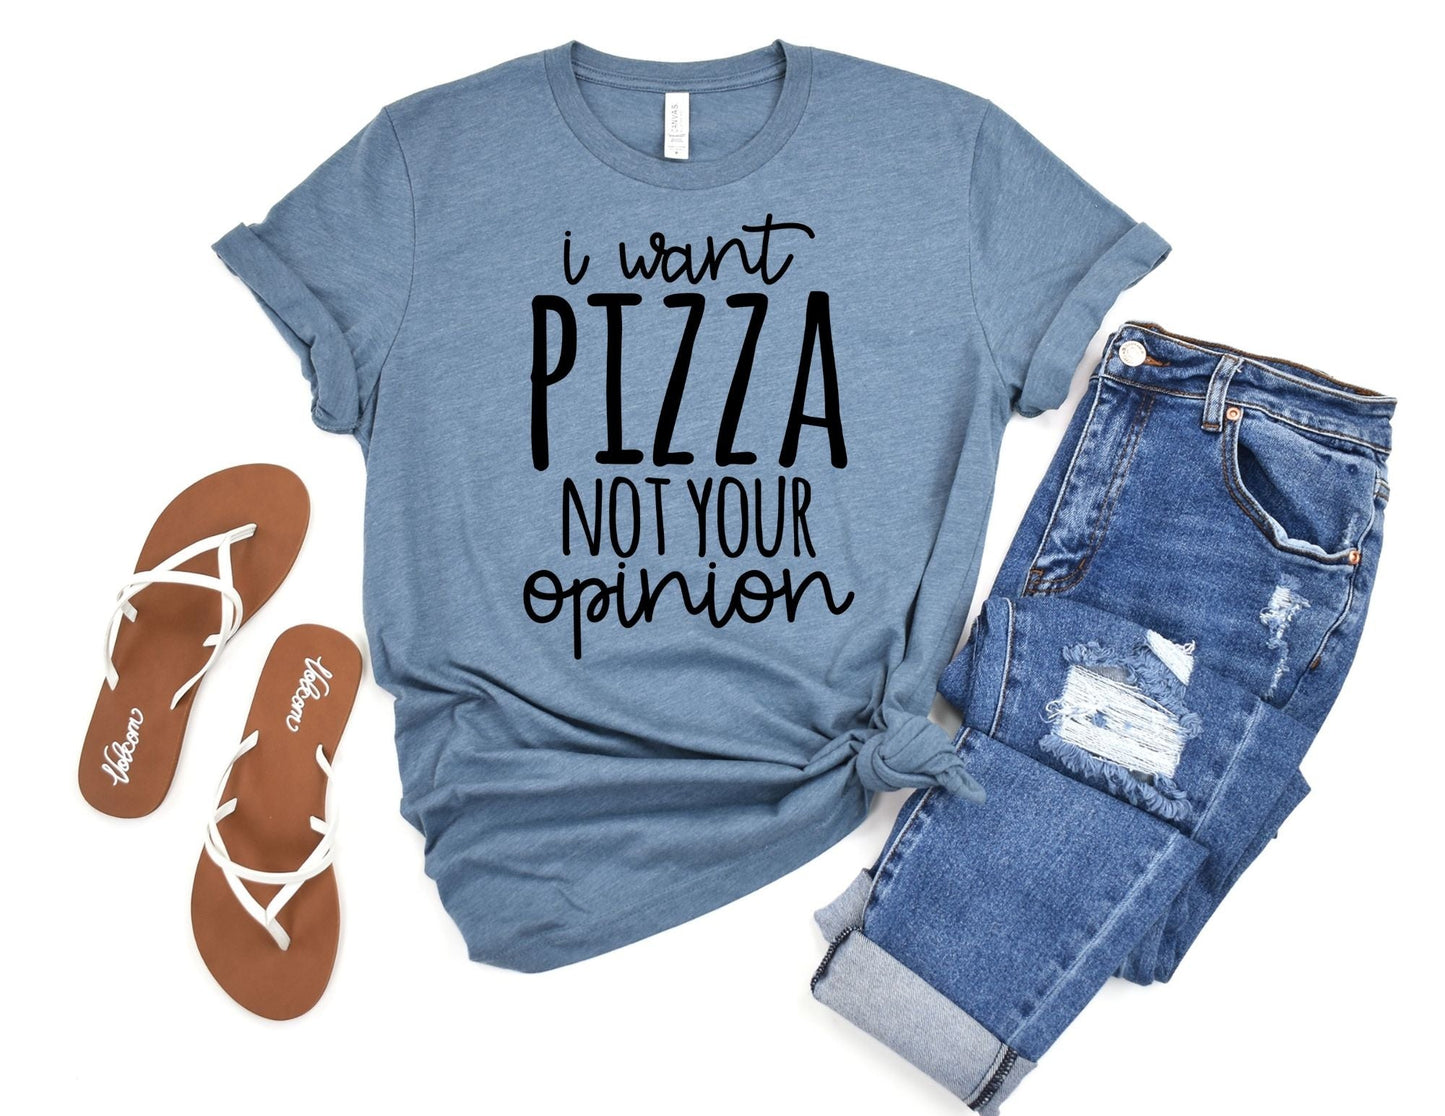 I Want Pizza not your Opinion Shirt - Funny Shirt